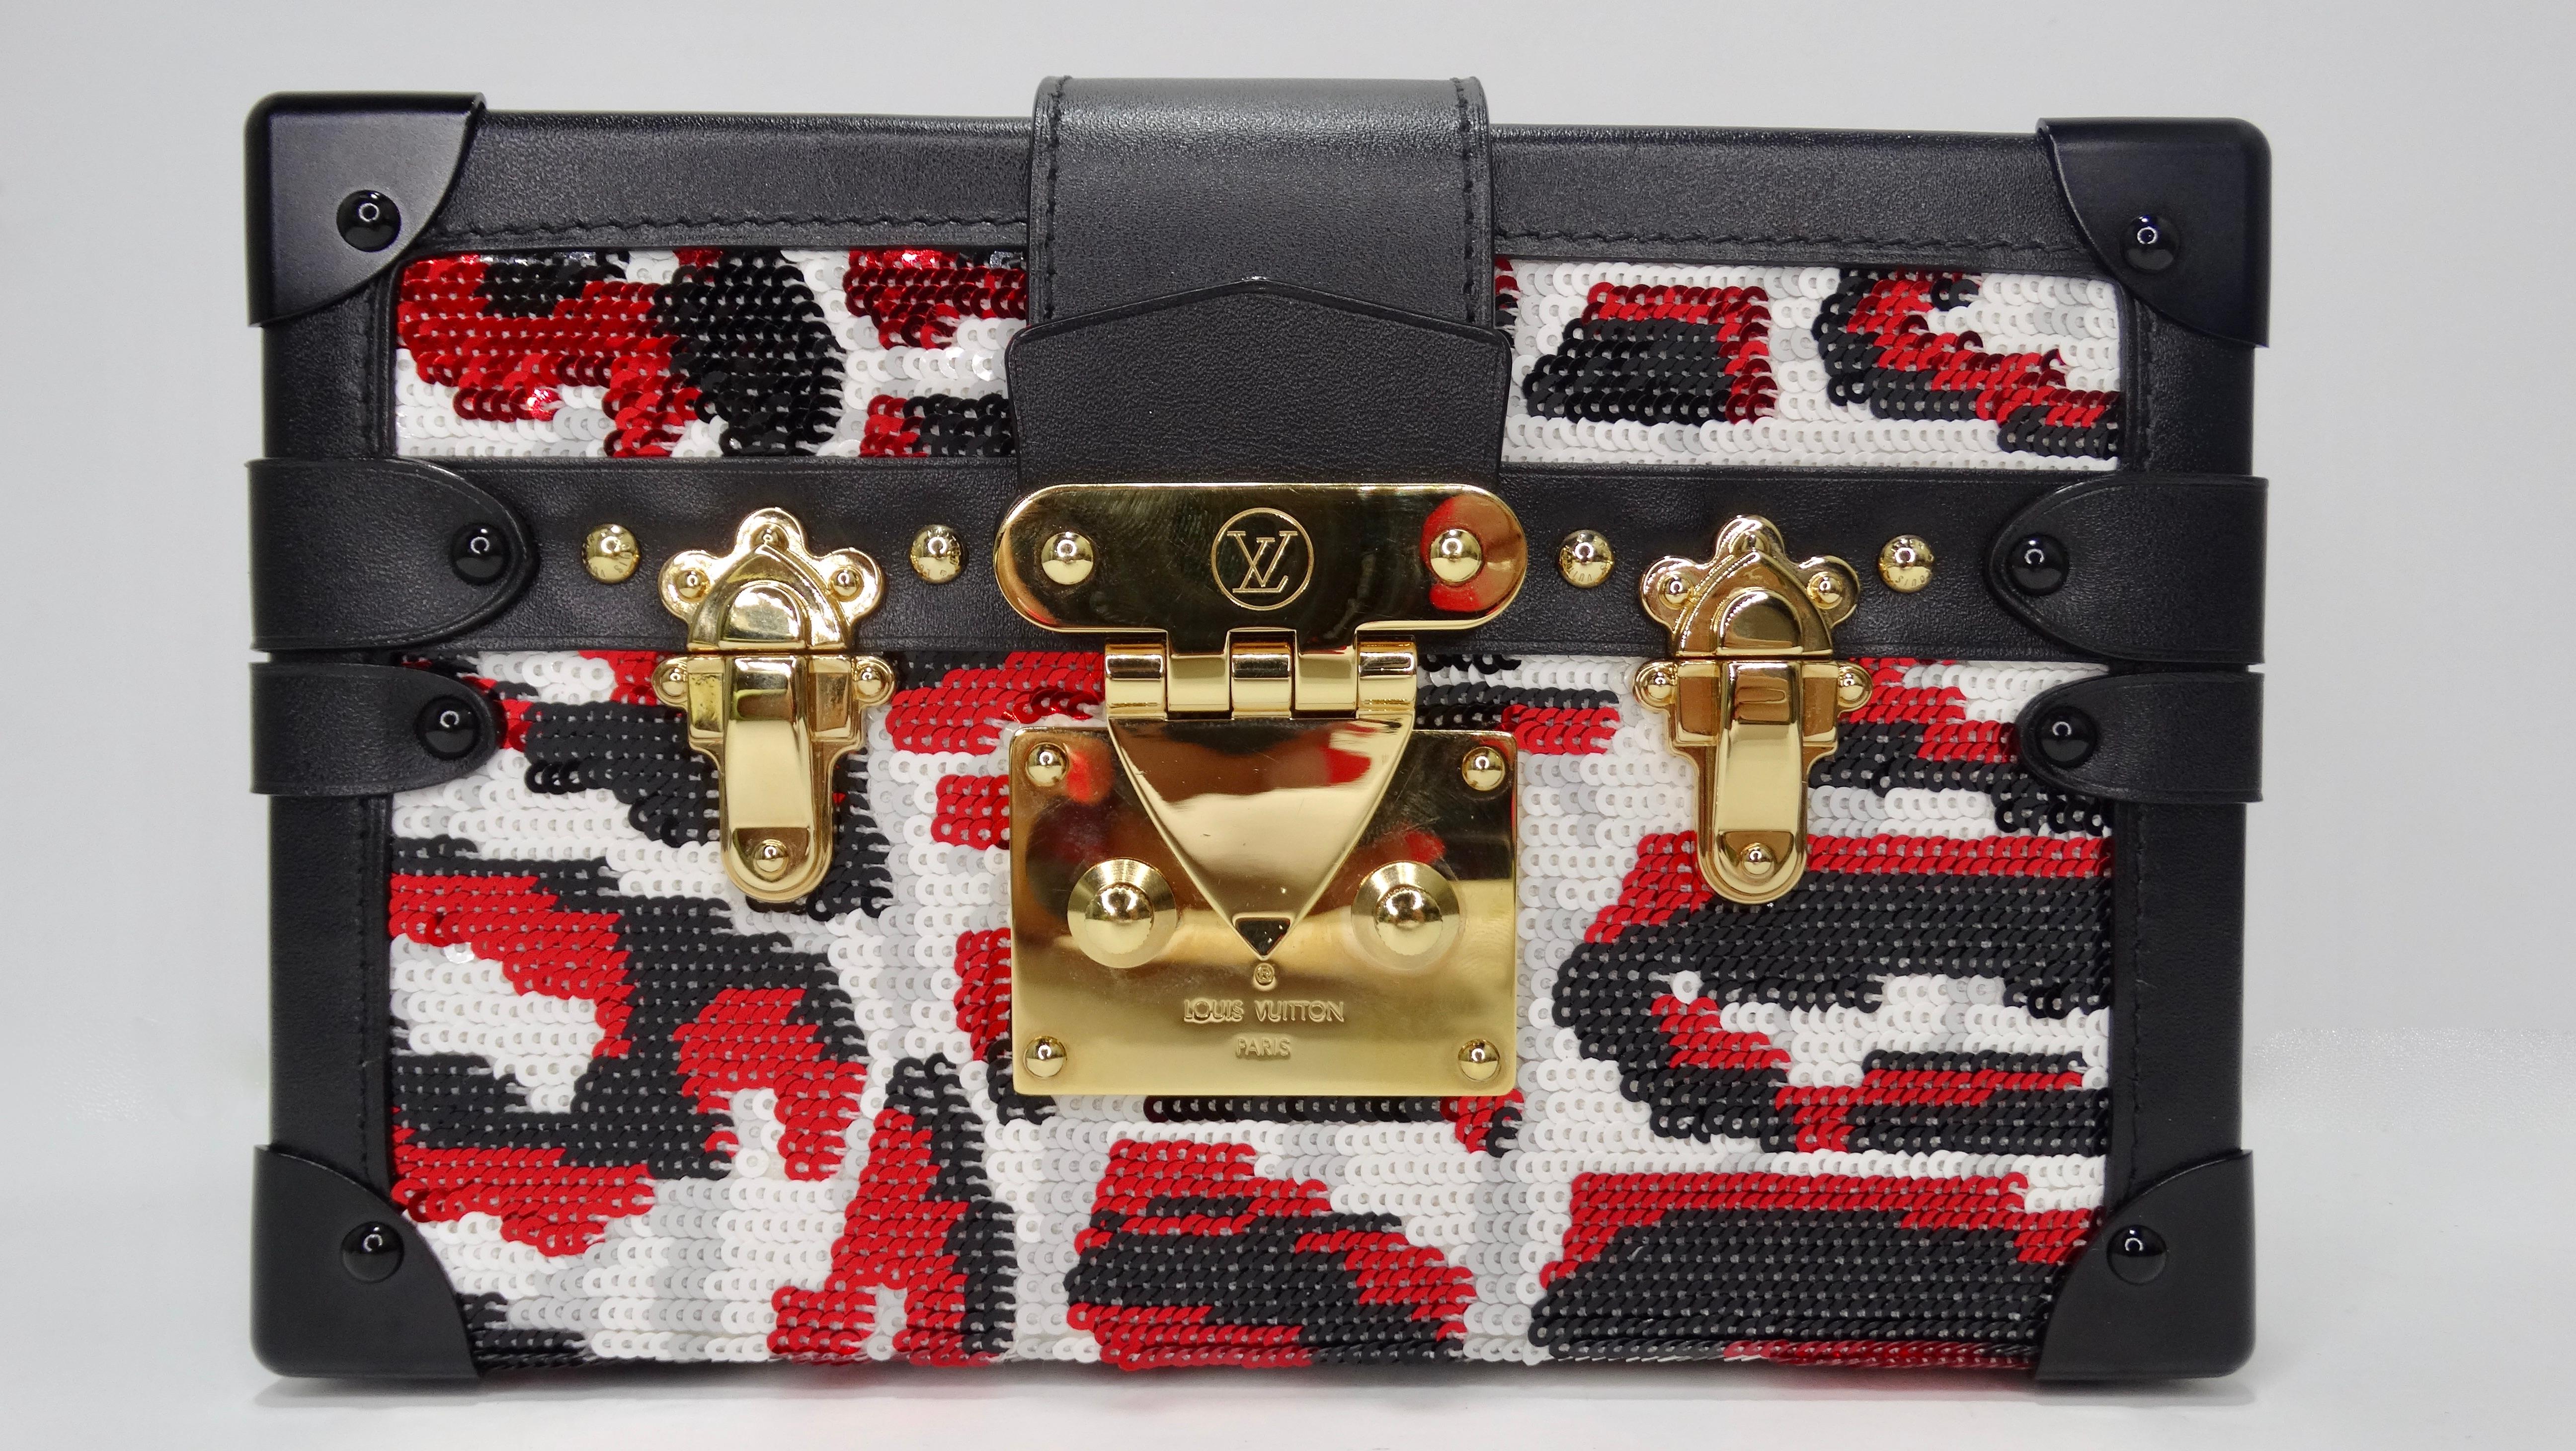 The sequin clutch you never knew you needed-- until NOW! This stunning sequin clutch by Louis Vuitton is a limited edition piece featuring red, black, and white sequins with lambskin leather trim. The inside of the clutch features a sheepskin lining